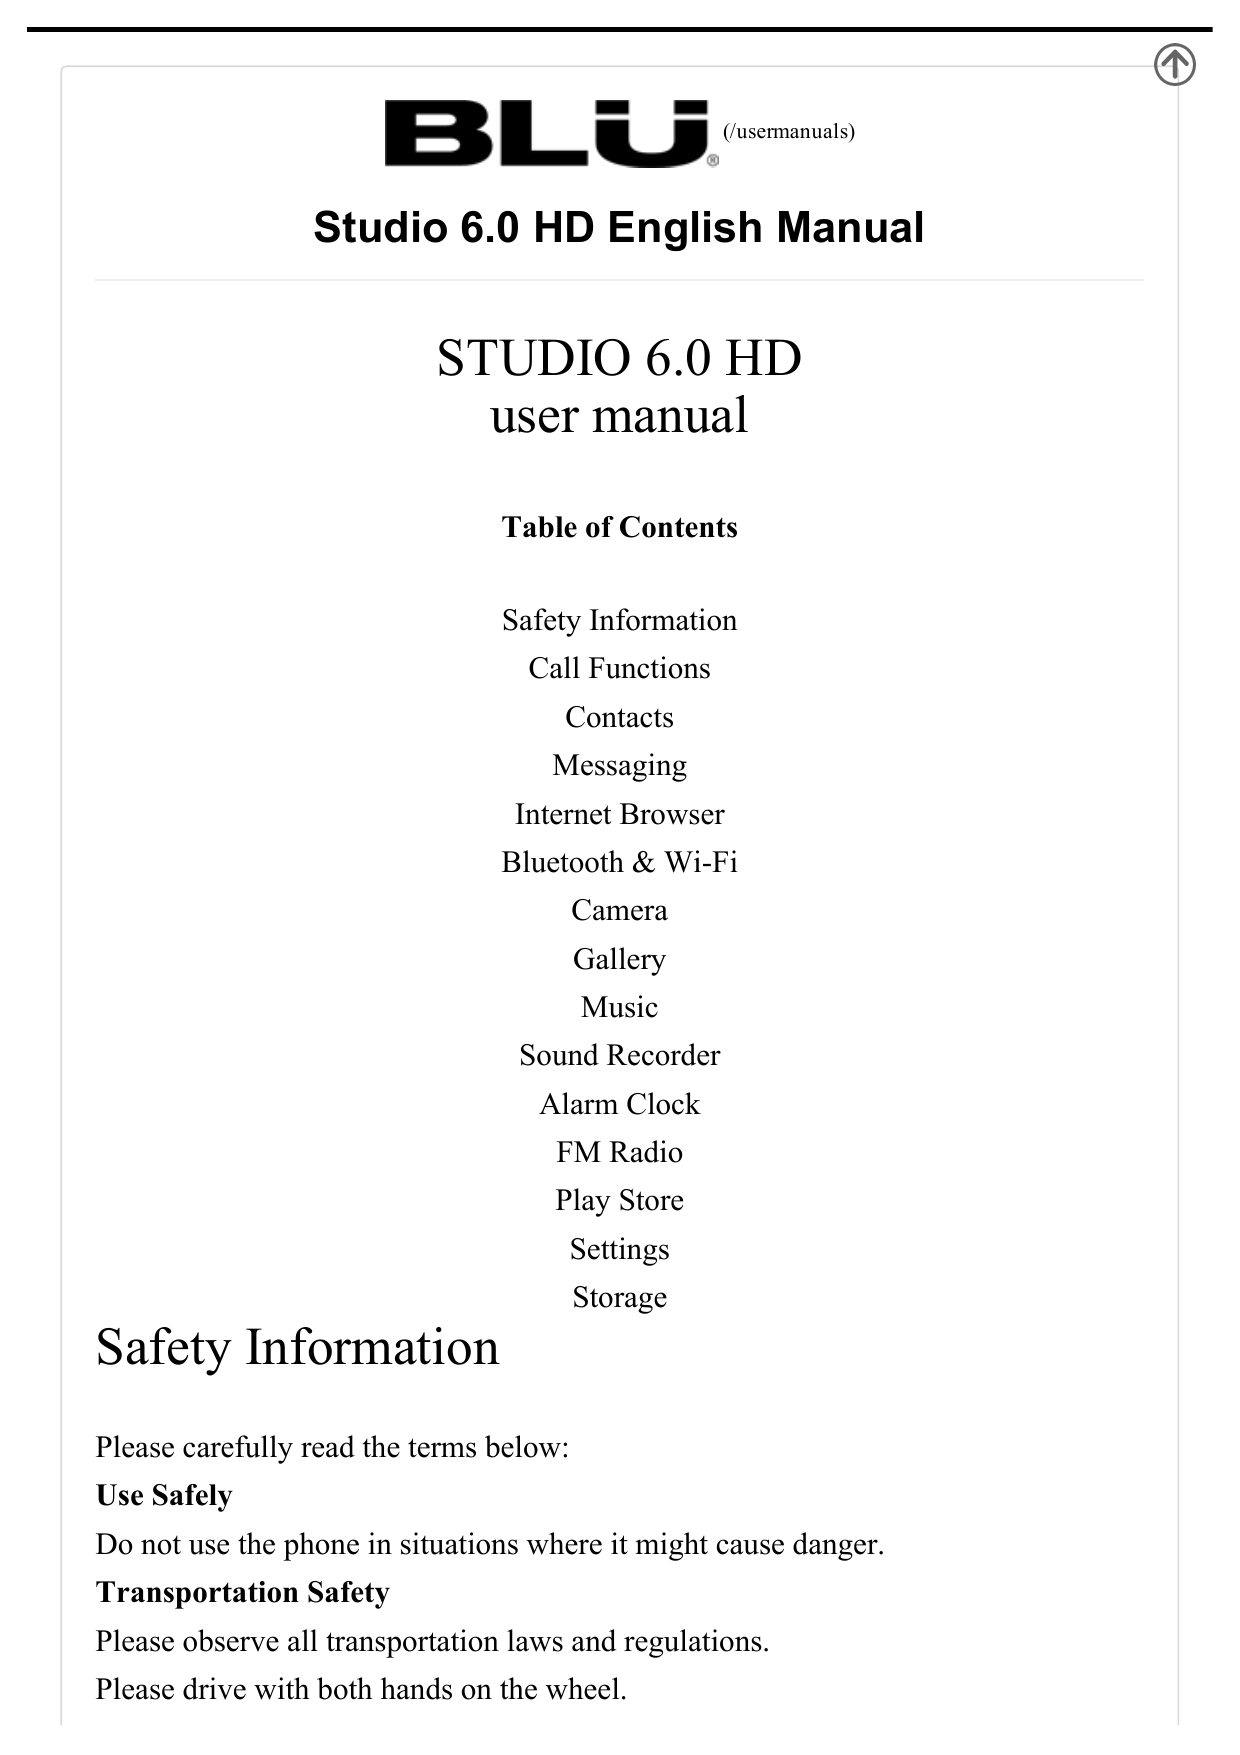  (/usermanuals)Studio 6.0 HD English Manual STUDIO 6.0 HDuser manual Table of Contents Safety InformationCall FunctionsContactsM